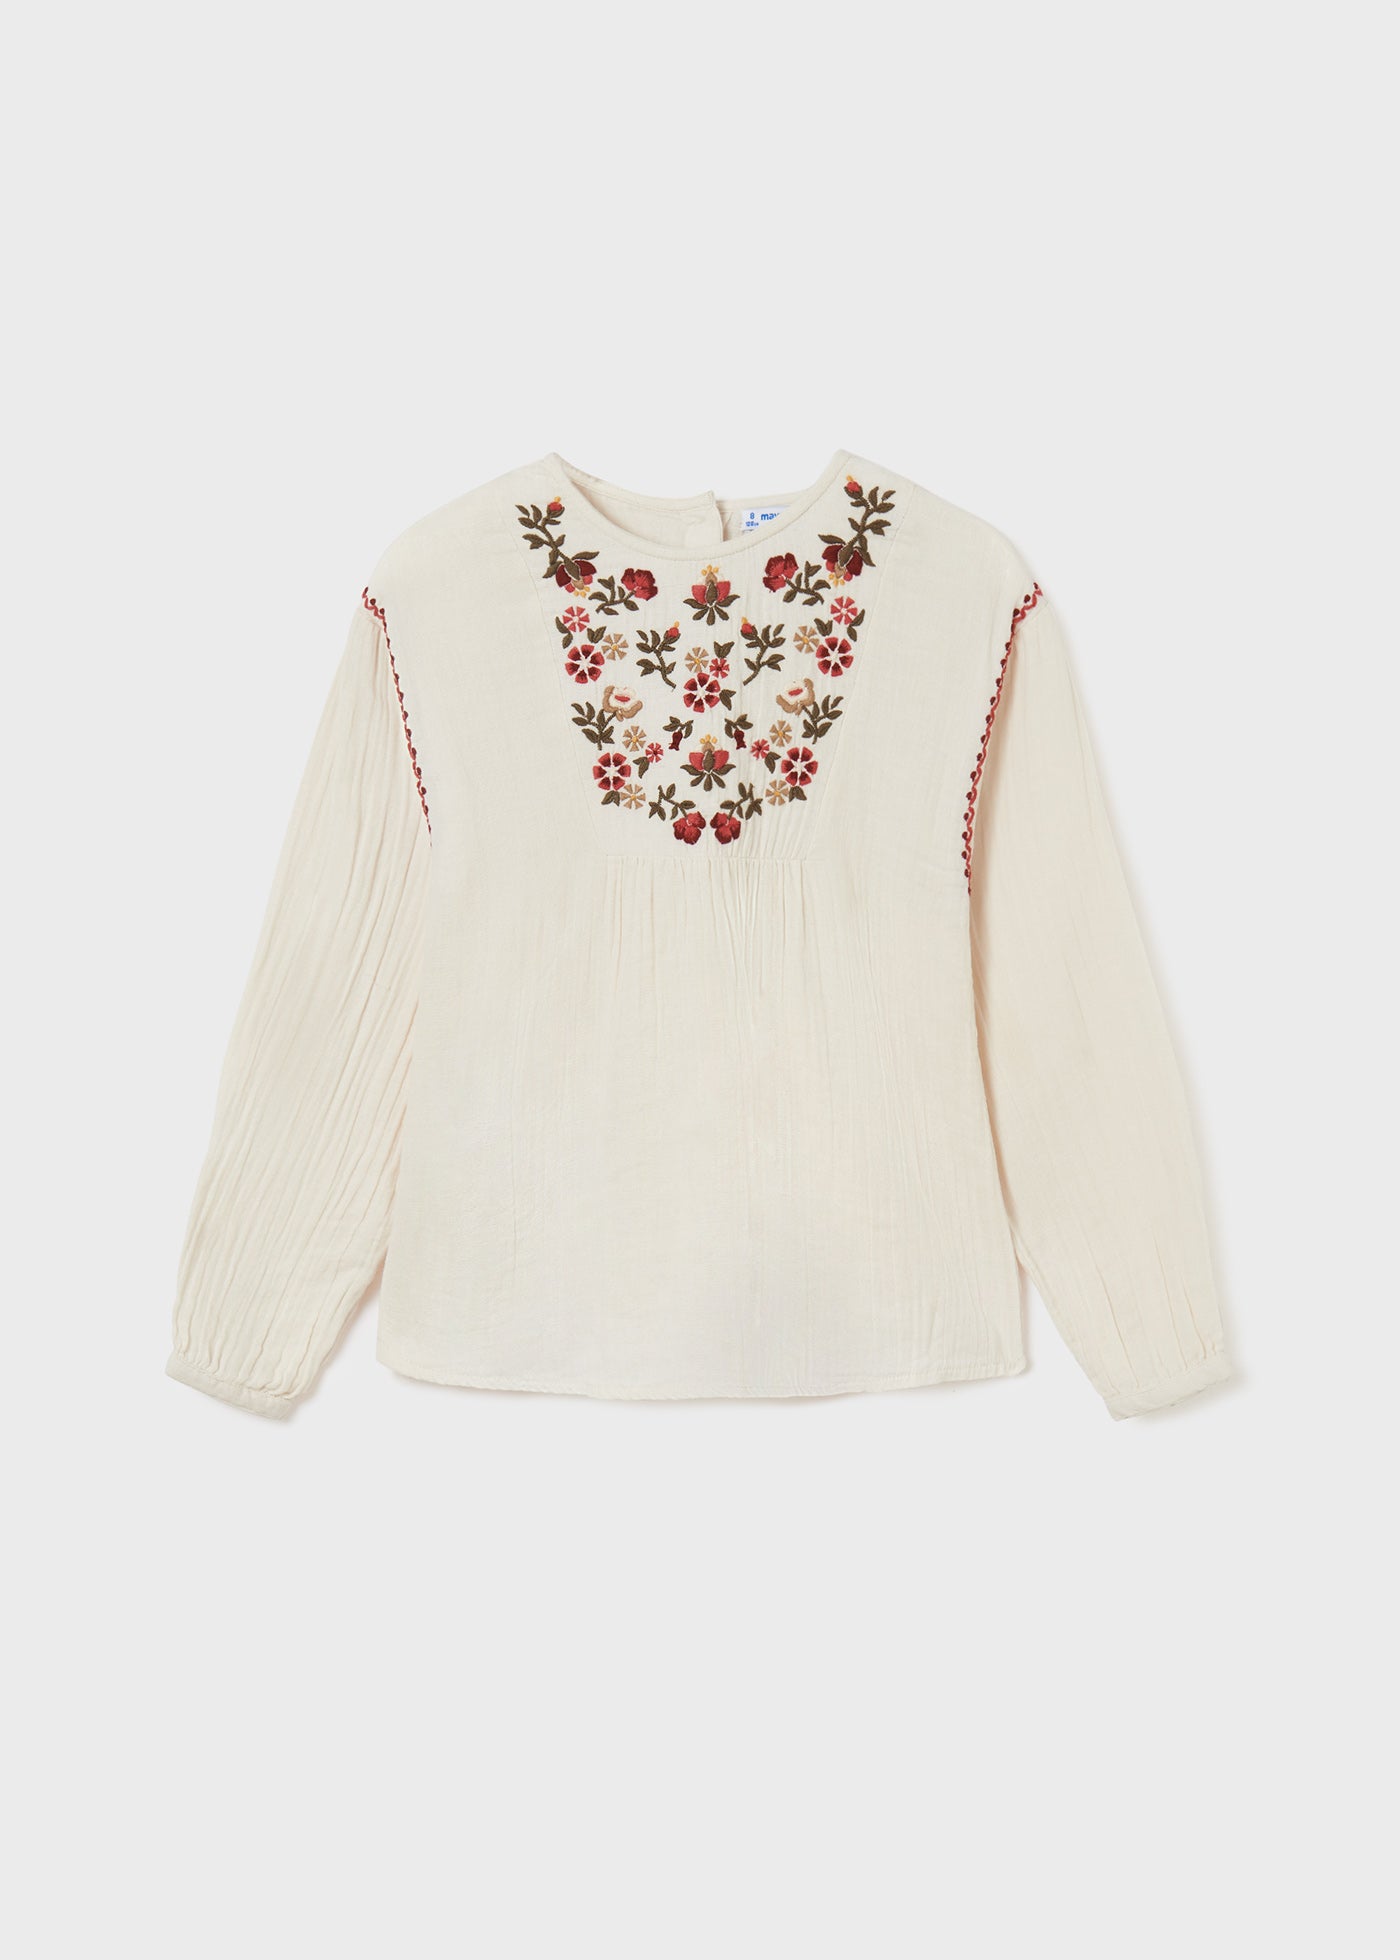 Embroidered Blouse- Chickpea